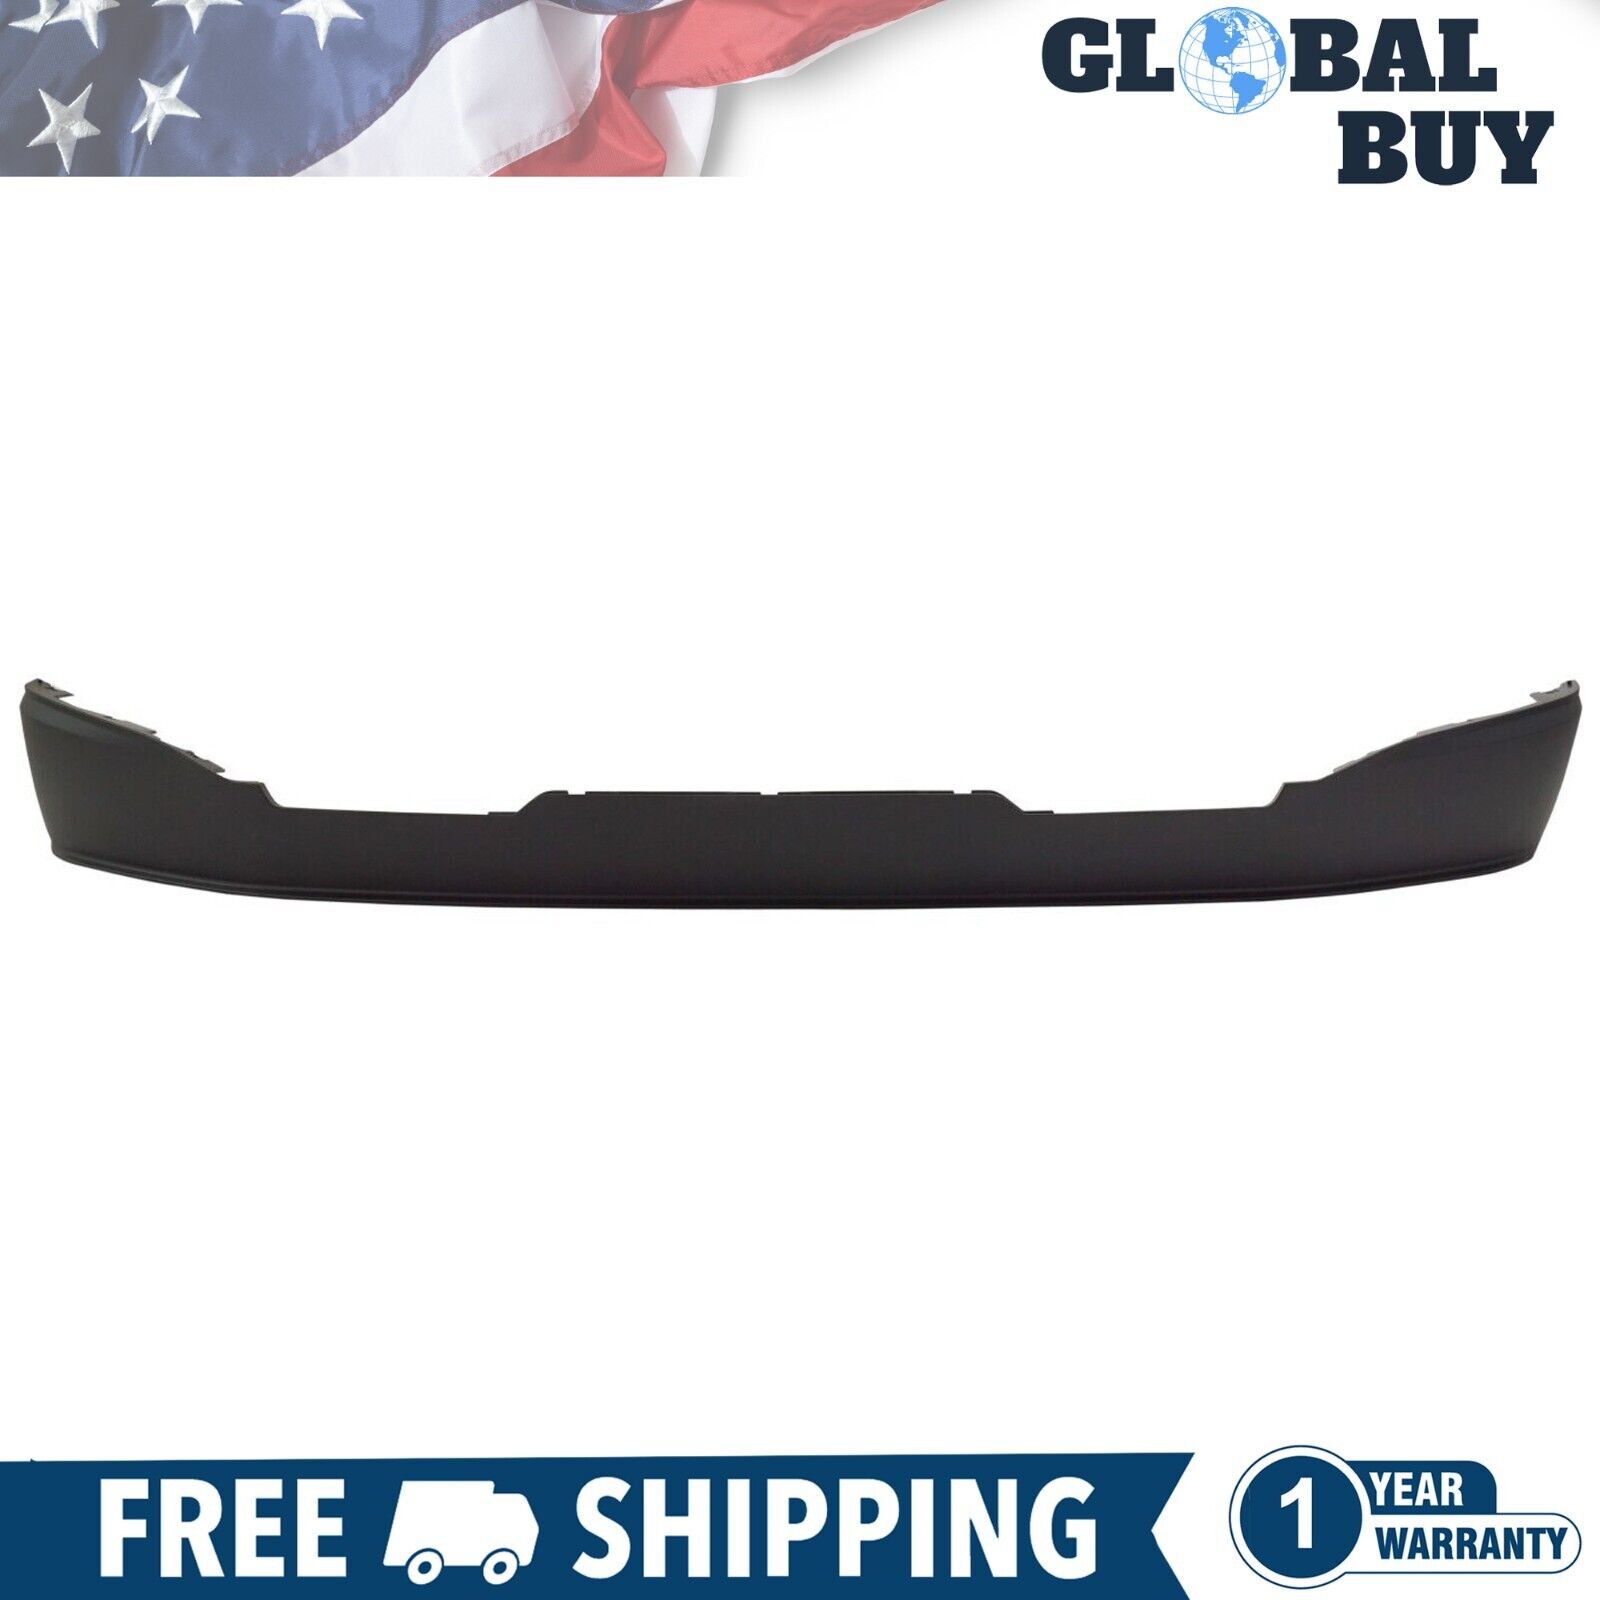 New Front Lower Valance Air Deflector For 2015-2020 Chevy Colorado GMC Canyon